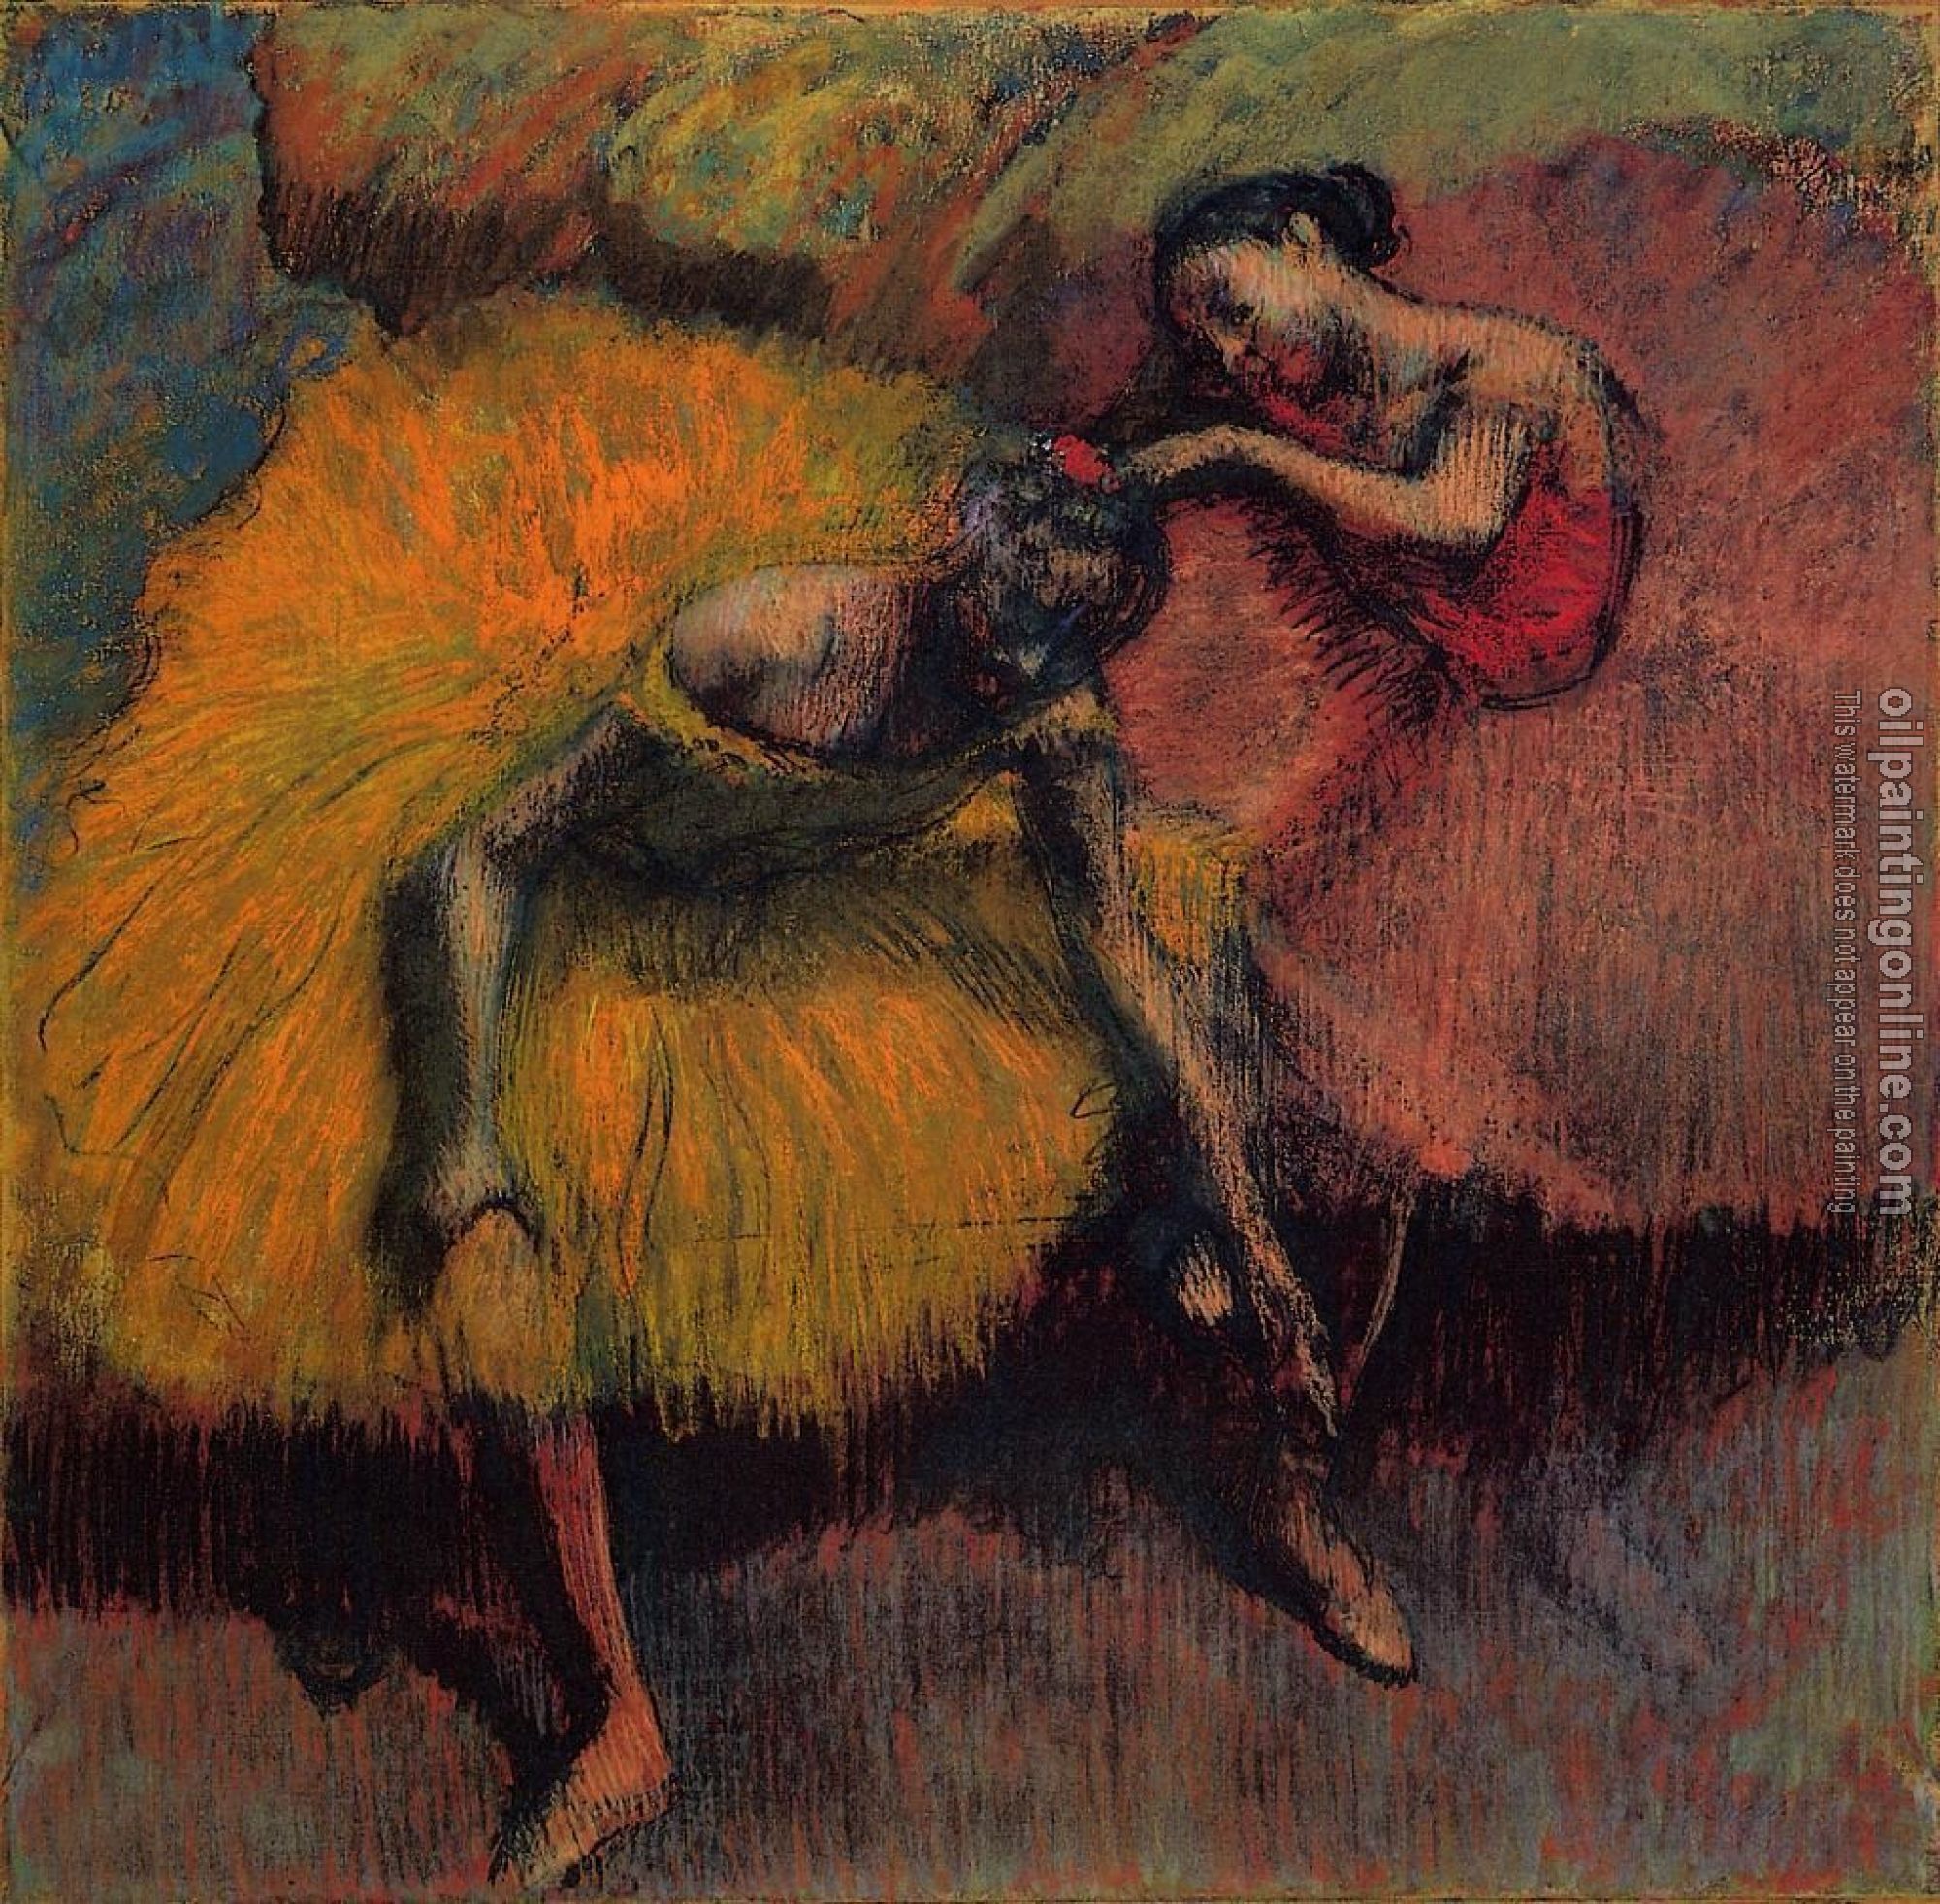 Degas, Edgar - Two Dancers in Yellow and Pink